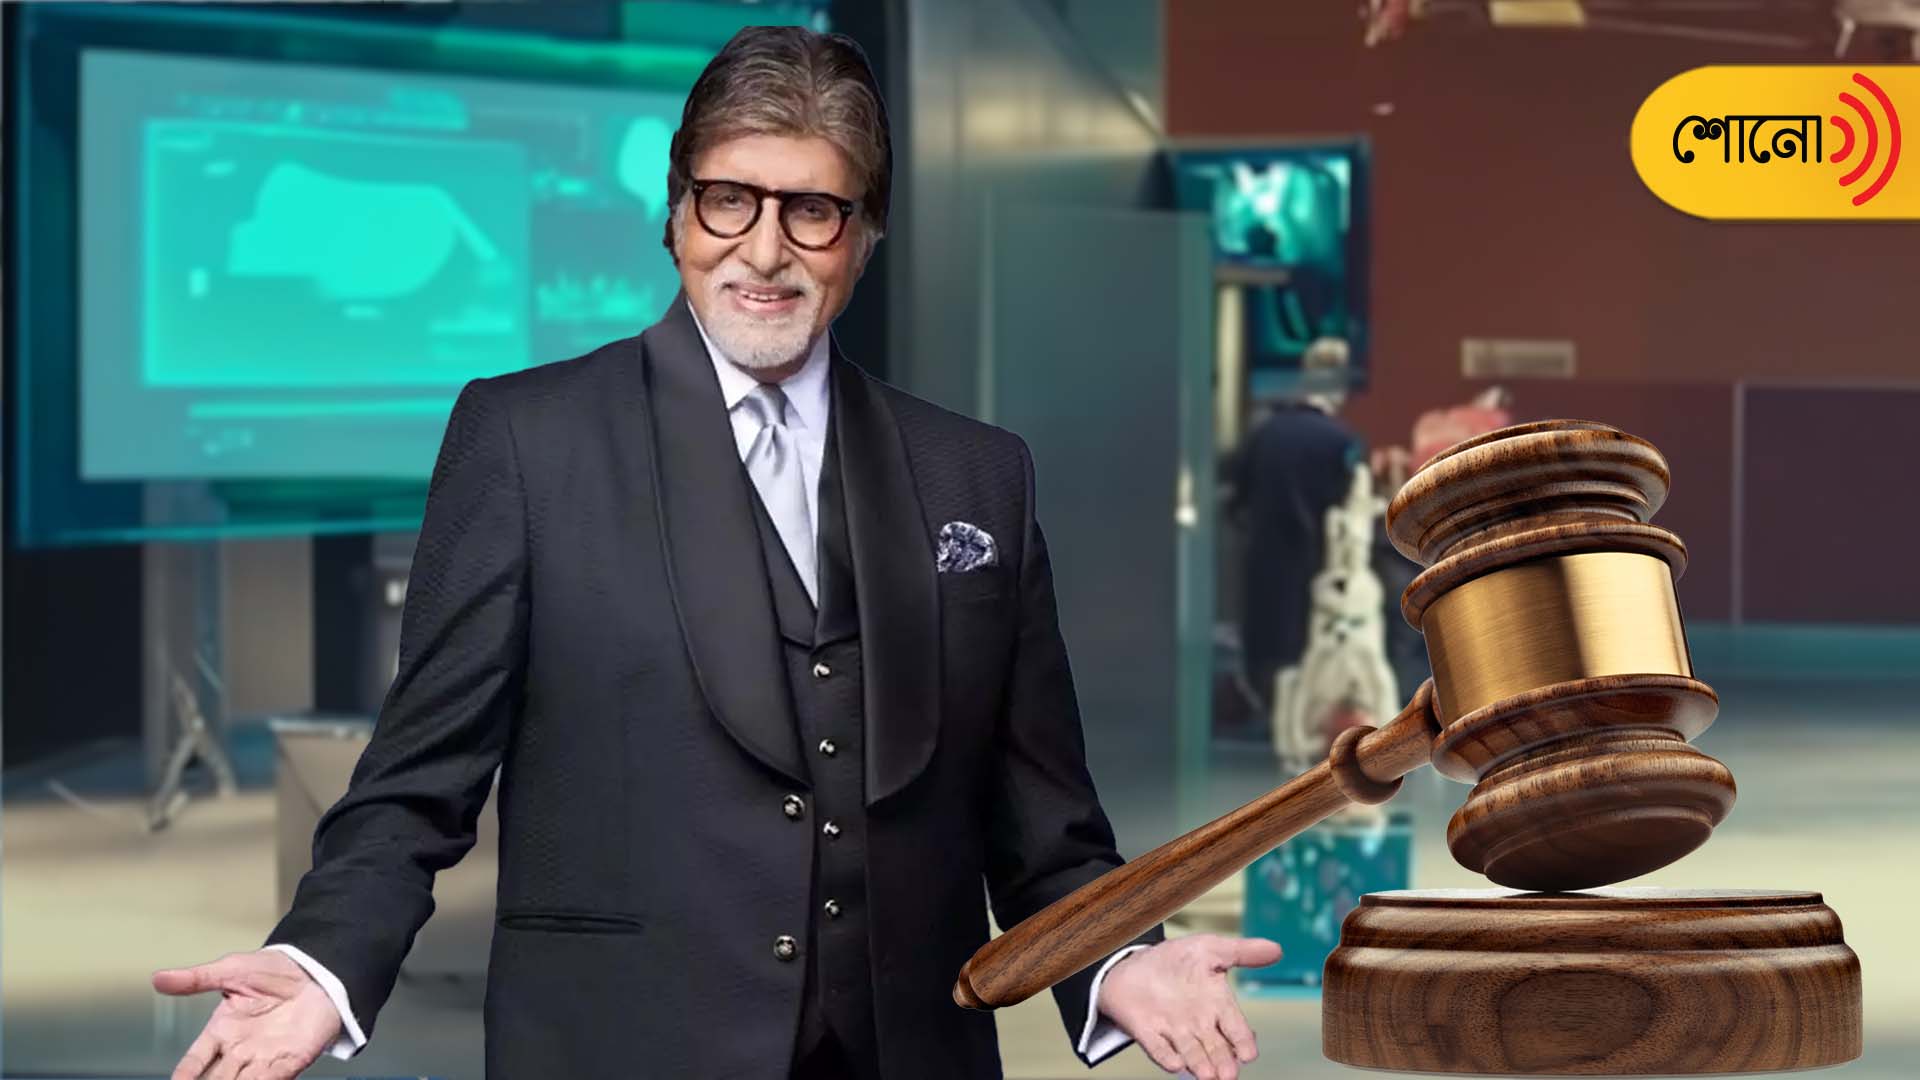 CAIT Files Complaint Against Amitabh Bachchan For 'Misleading' Ad